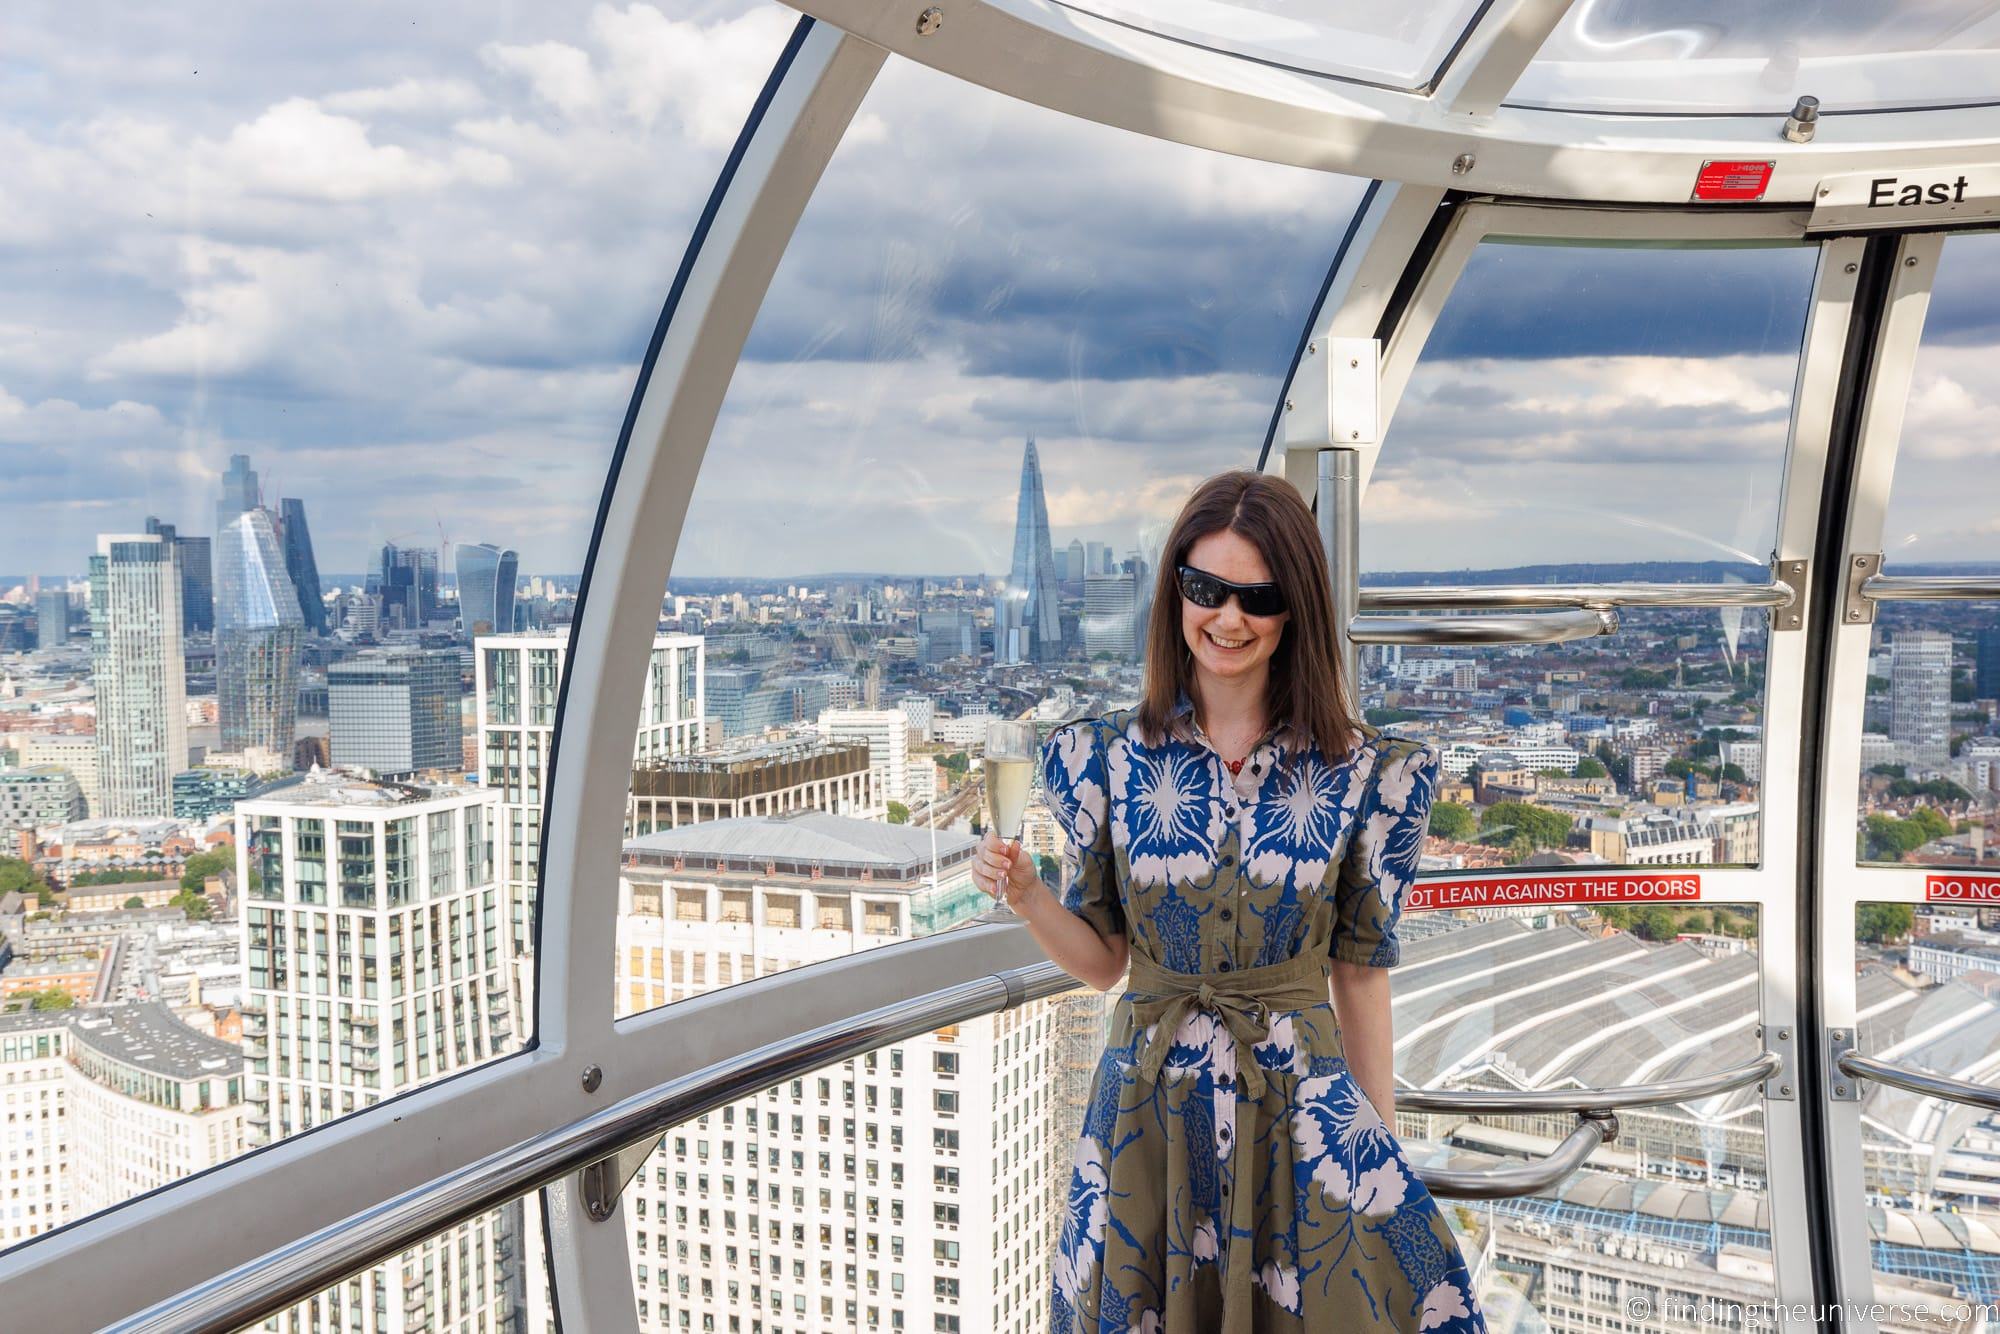 Take a Spin on the London Eye